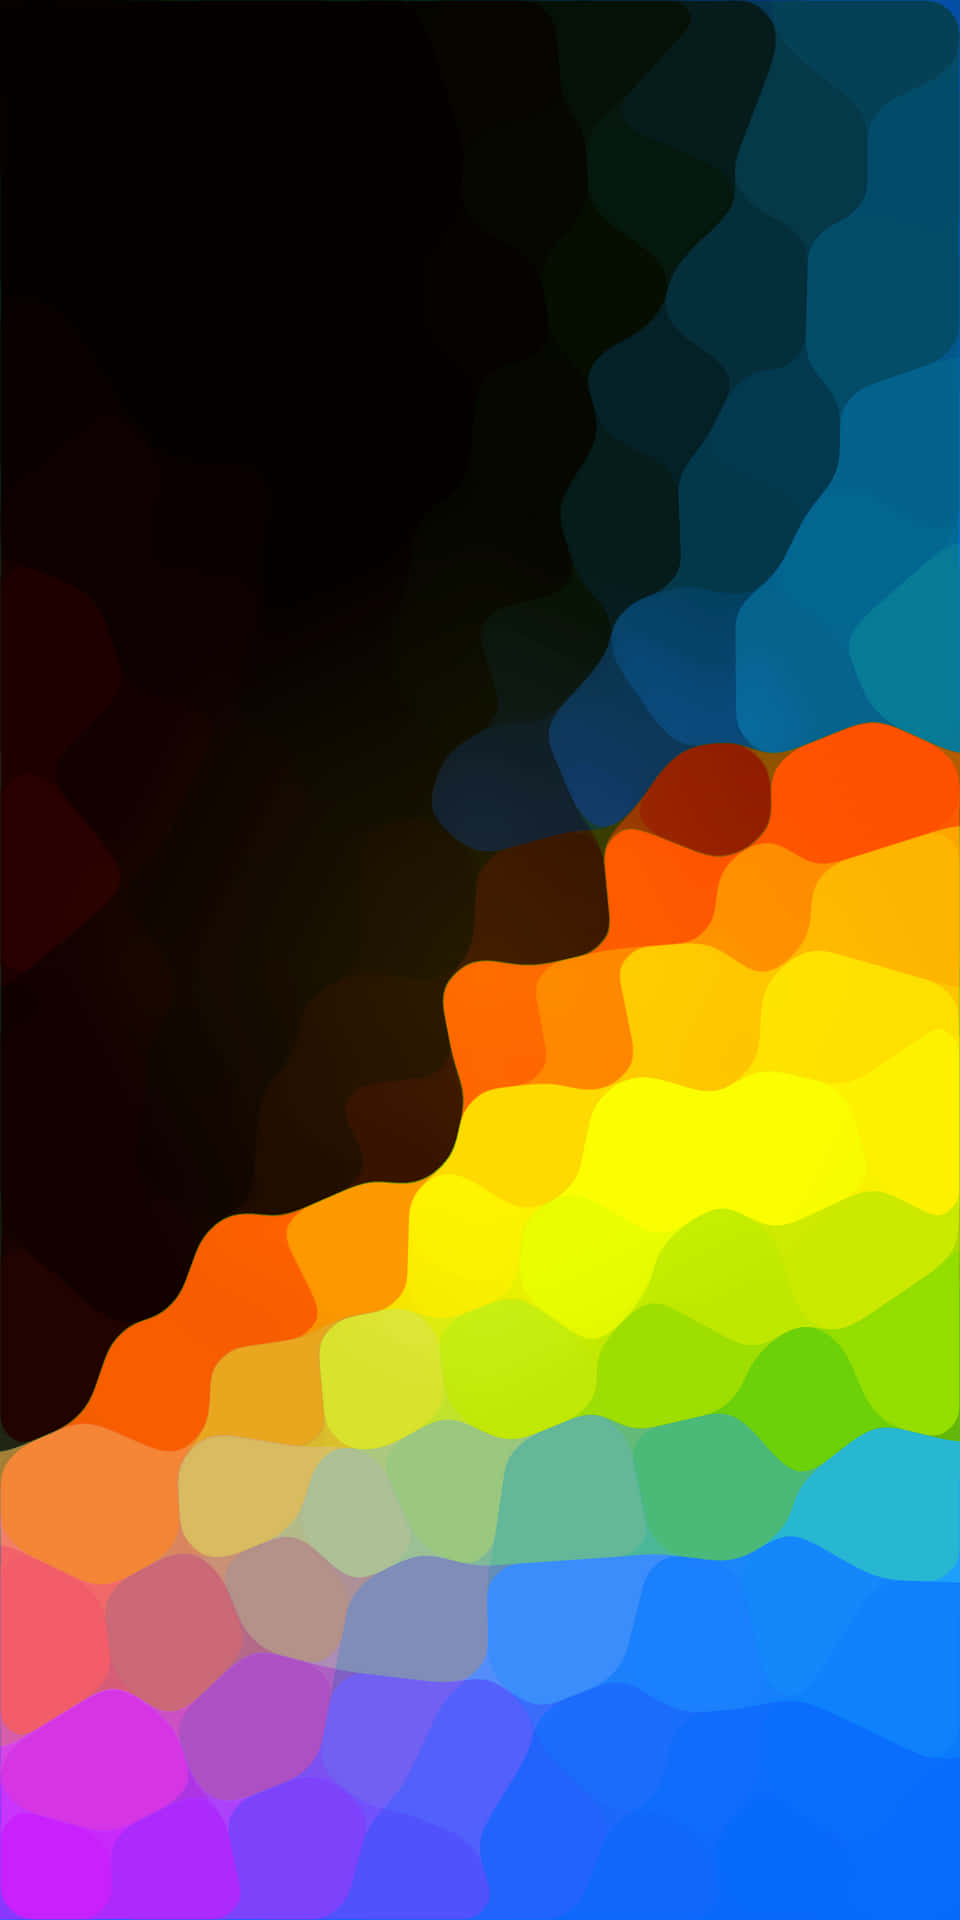 A Colorful Abstract Background Wallpaper